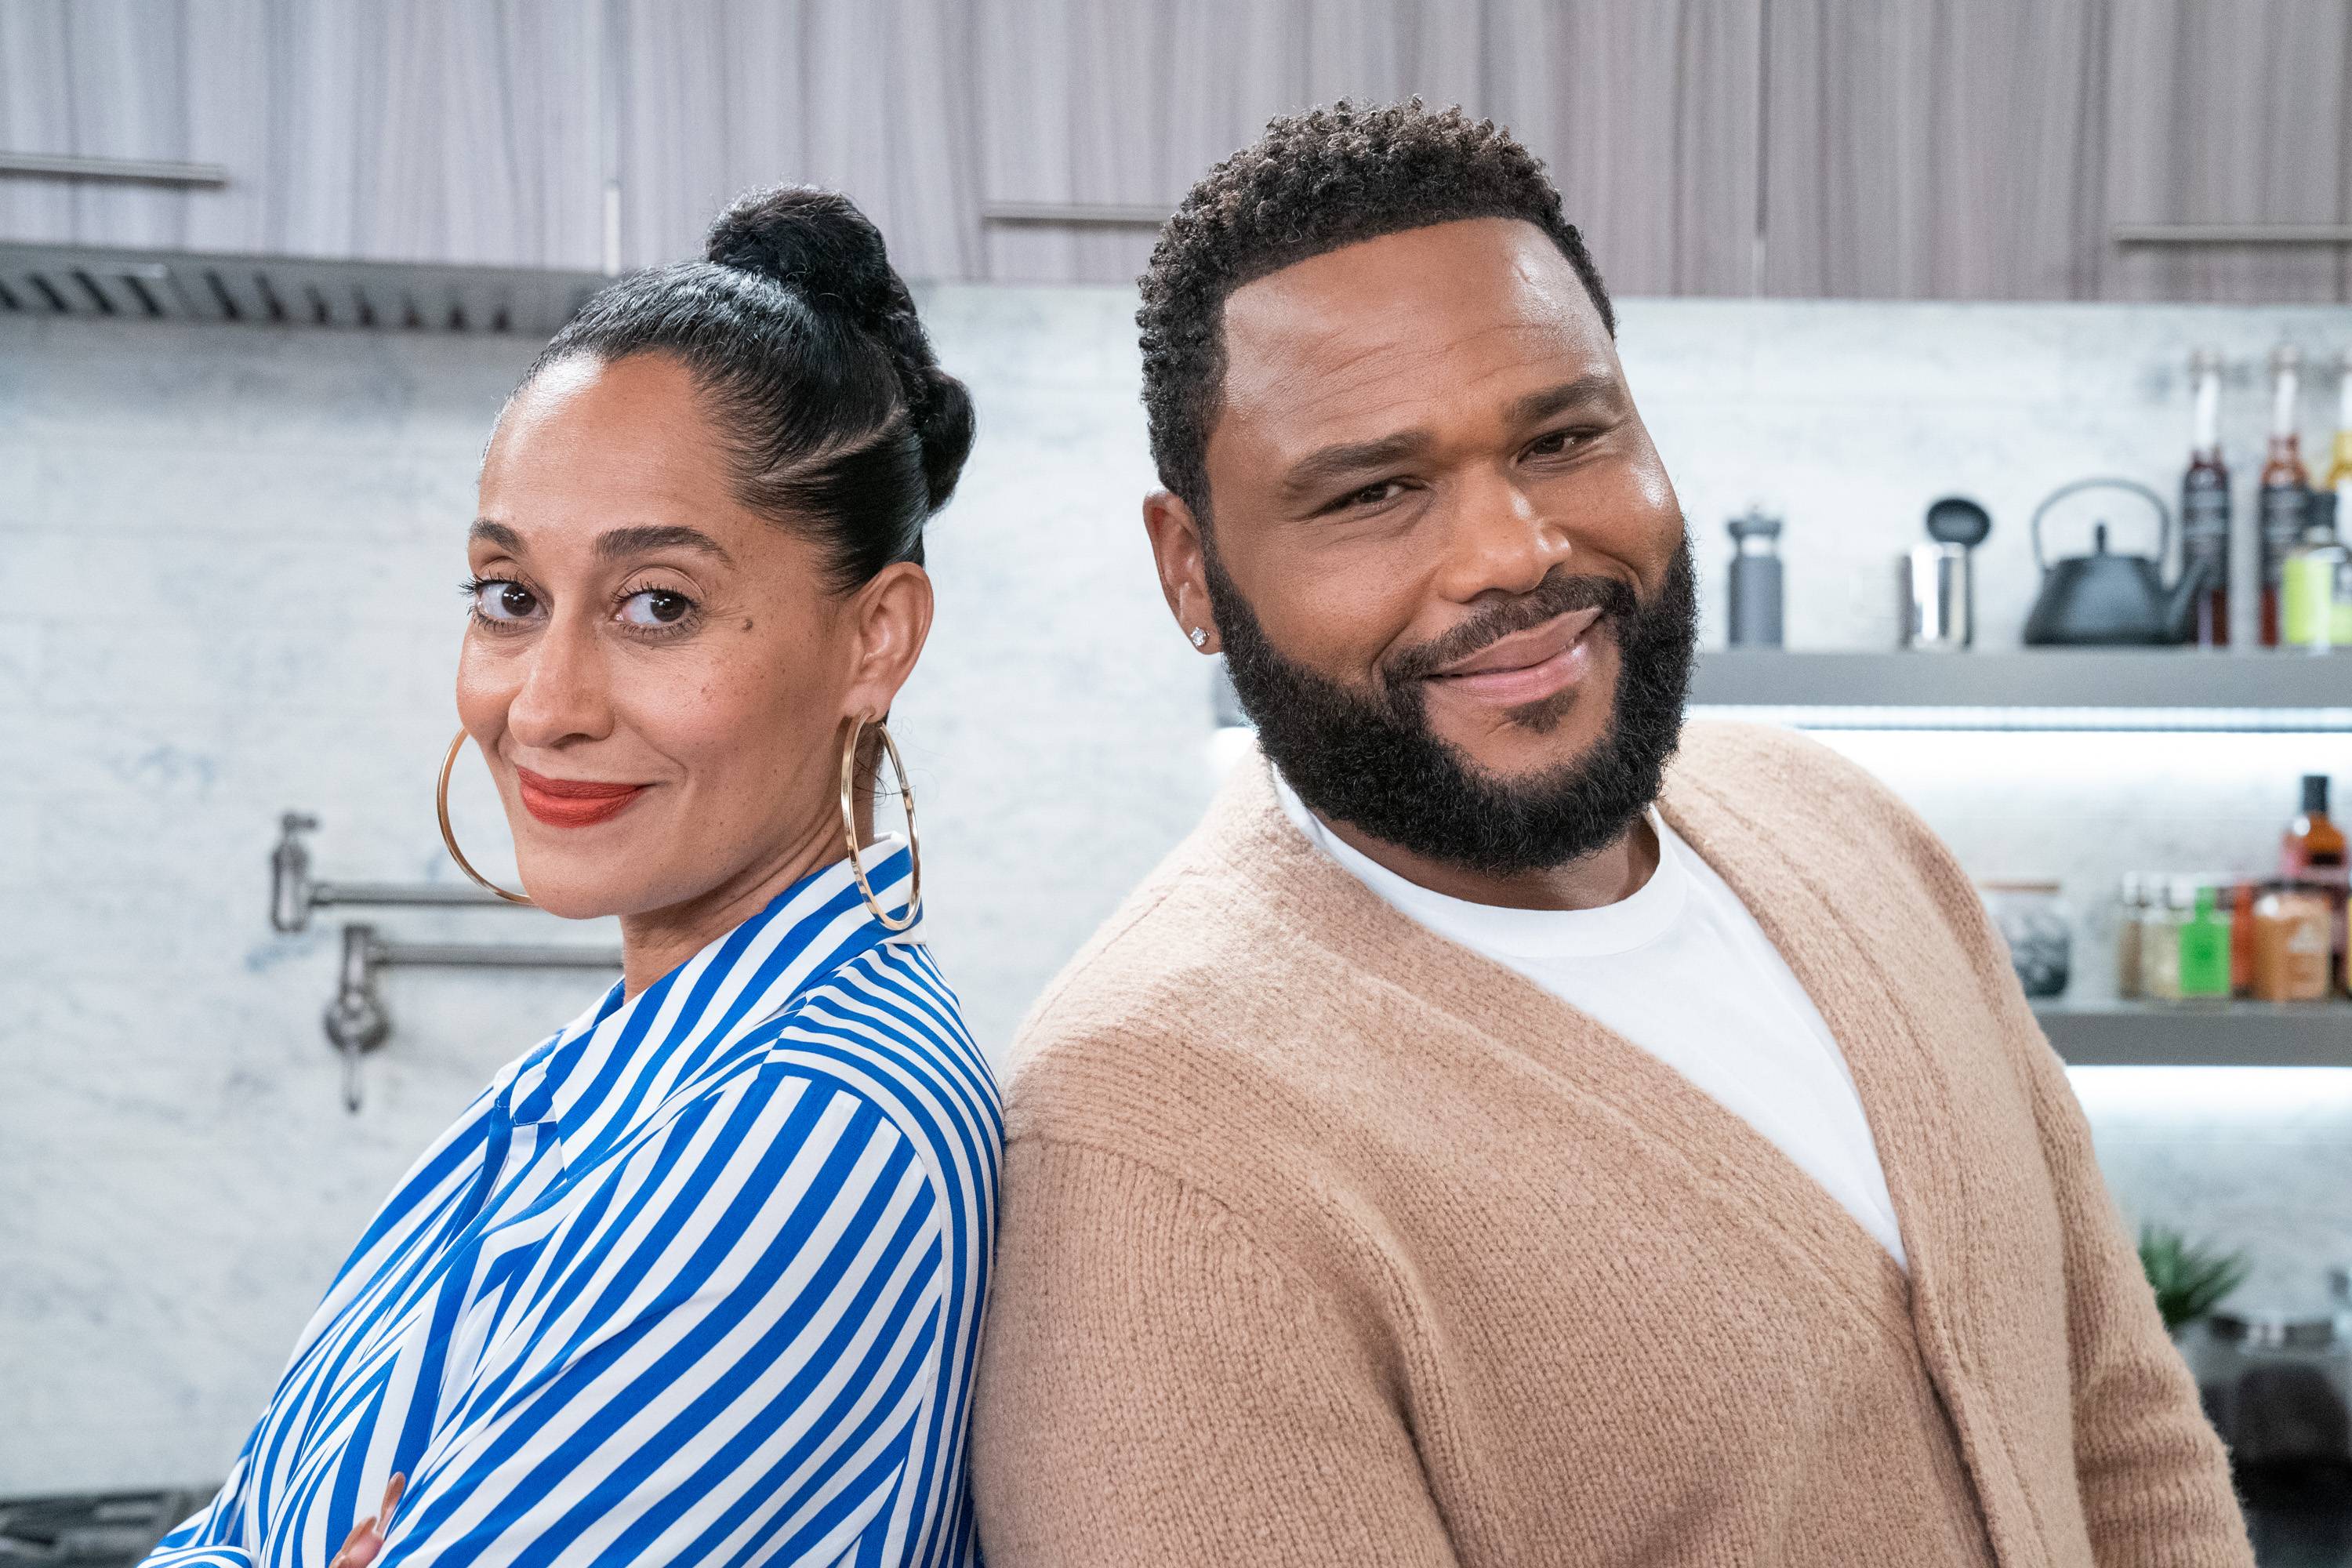 BLACK-ISH - "When I Grow Up (To Be a Man)" - Jack gets cut from the basketball team and it leads to a family discussion about him being short for his age. Dre is worried for his future, but Bow feels strongly that Jack will overcome his adversity and be stronger for it, on "black-ish," TUESDAY, OCT. 15 (9:30-10:00 p.m. EDT), on ABC. (Christopher Willard via Getty Images)
TRACEE ELLIS ROSS, ANTHONY ANDERSON